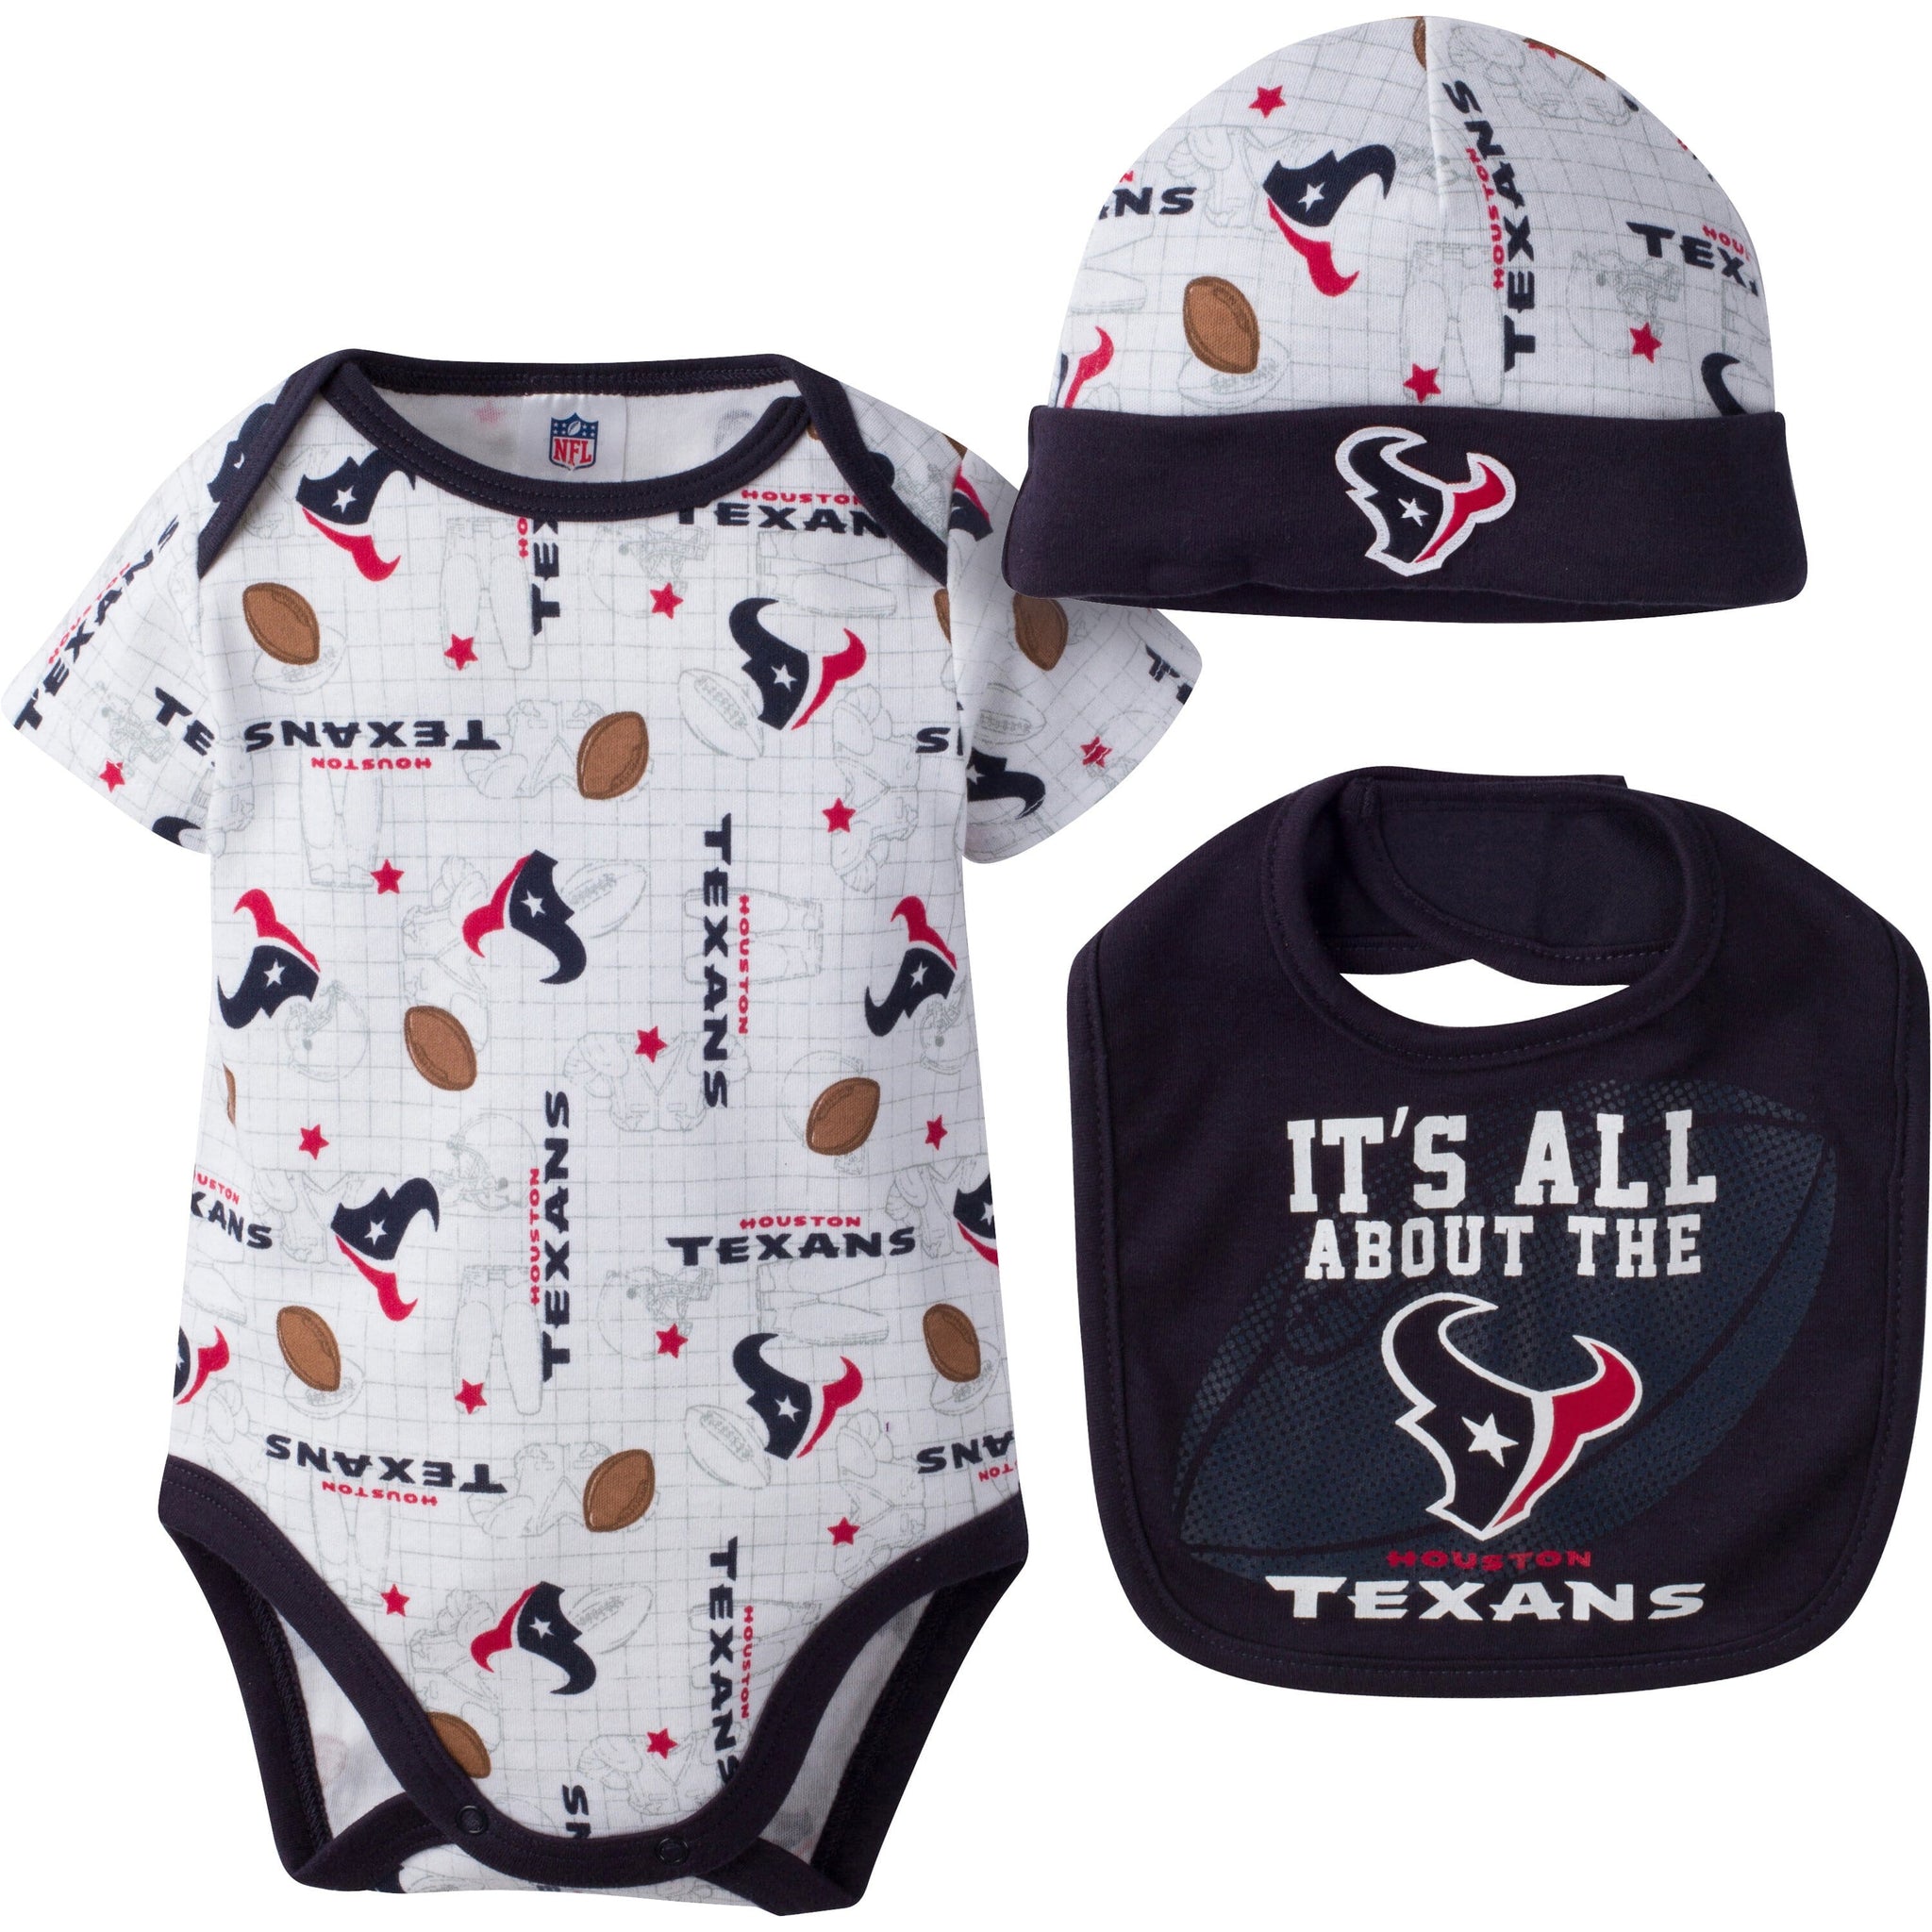 baby texans jersey